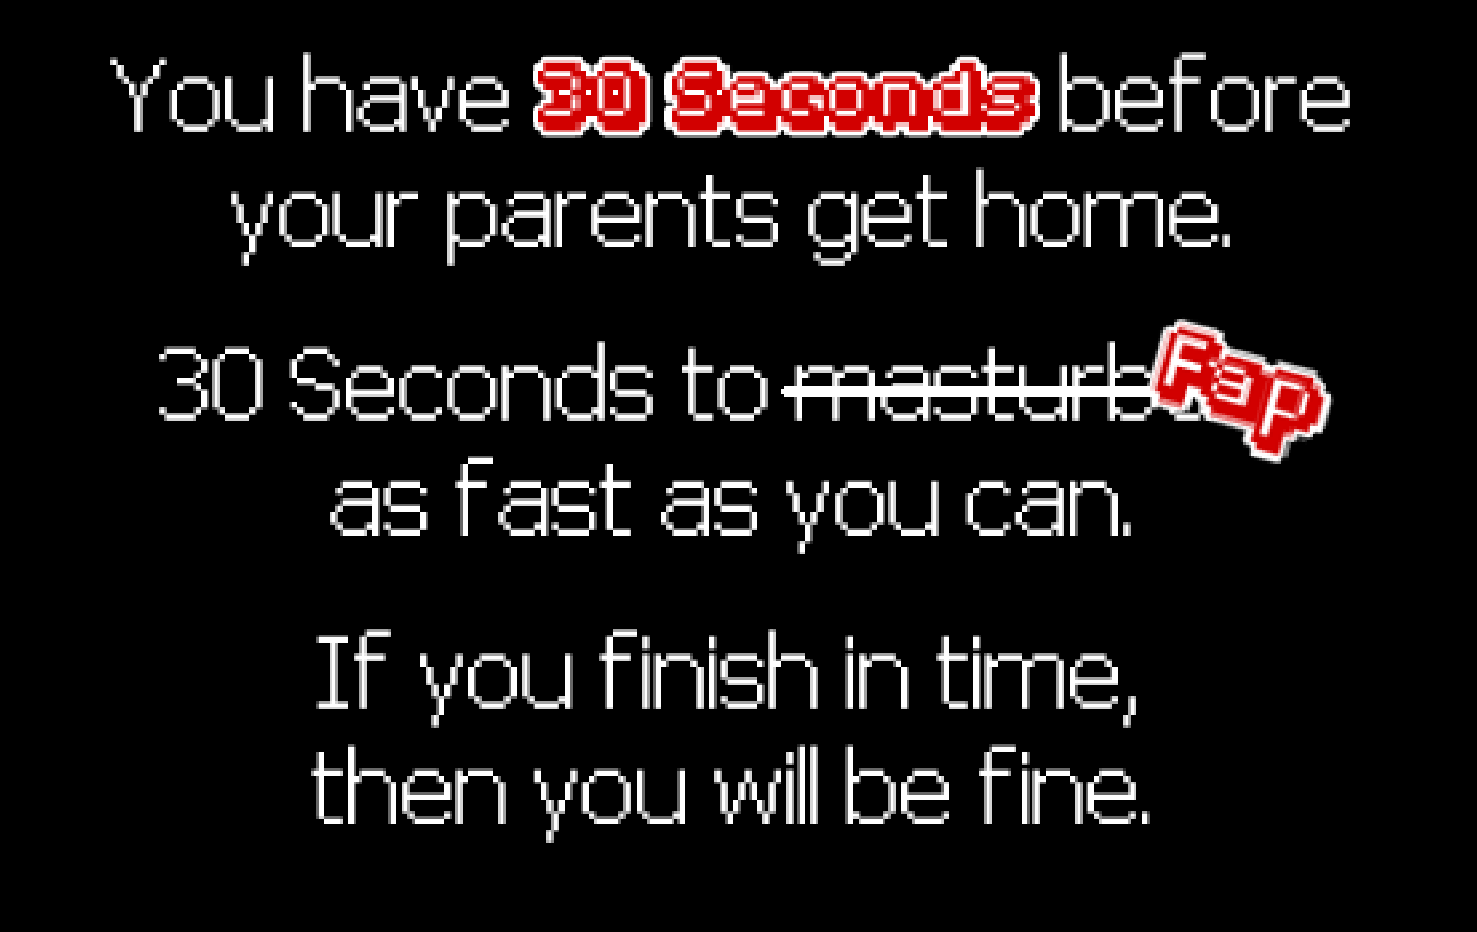 30 Seconds To Fap by JS Games